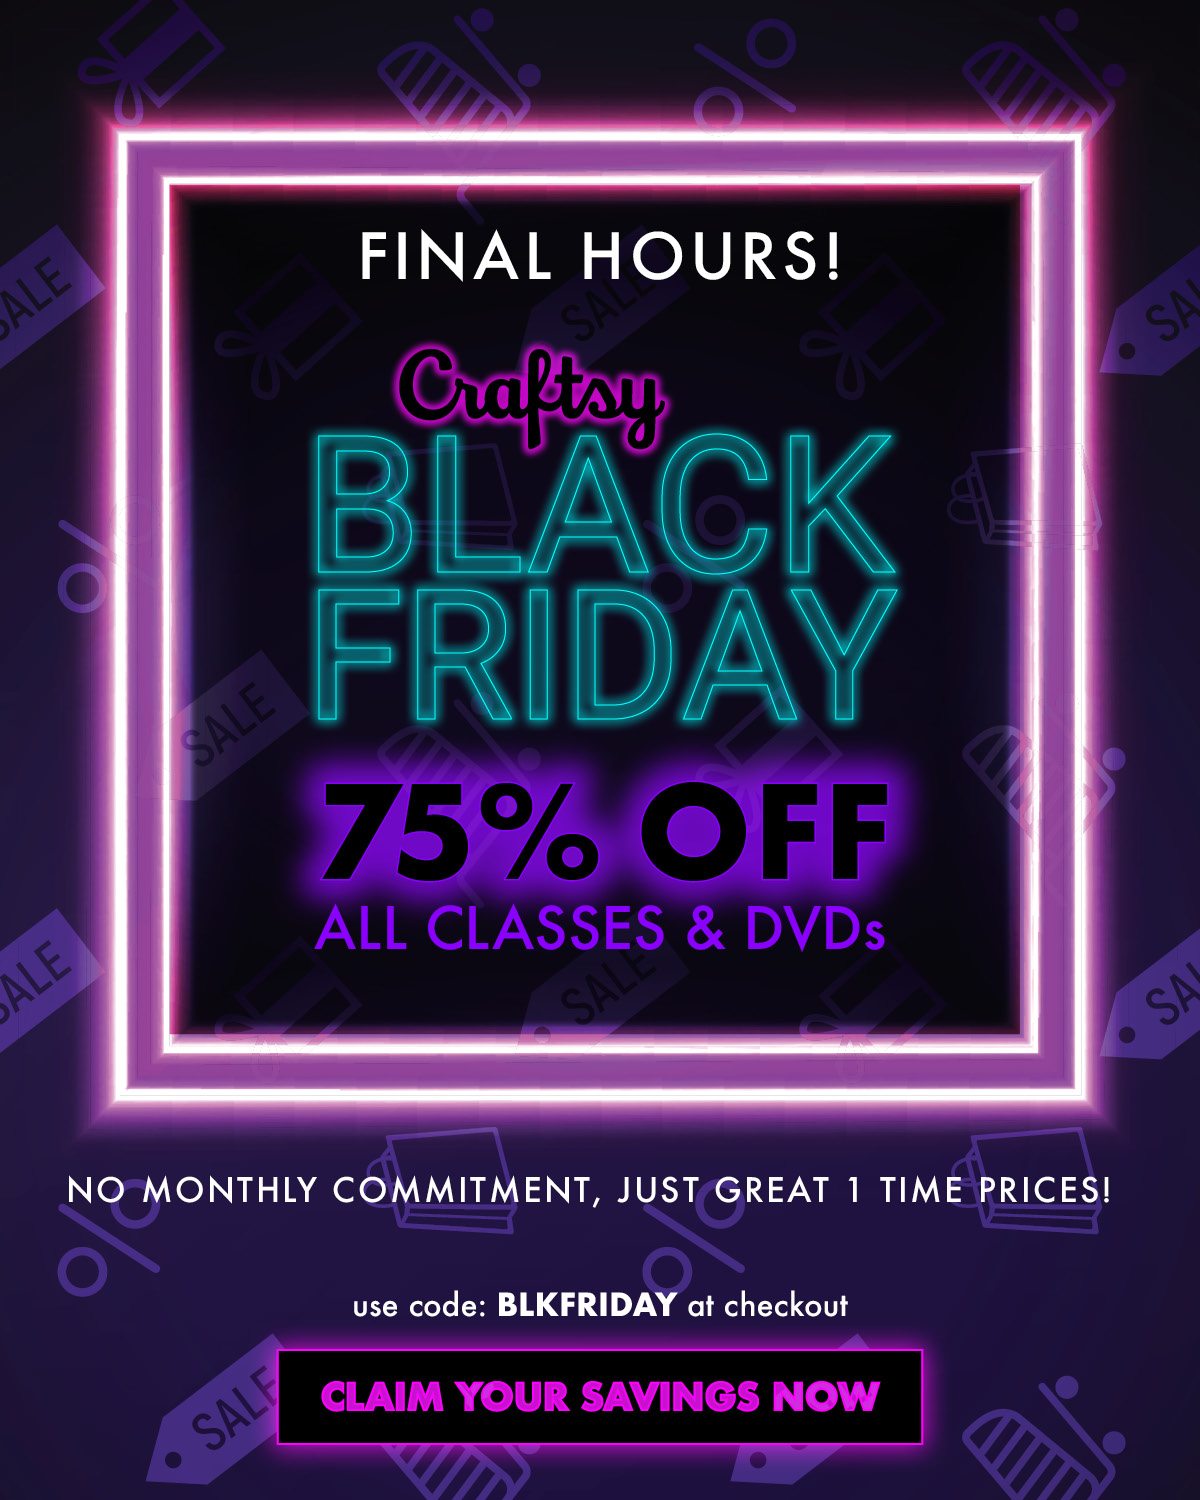 Craftsy Black Friday 75% OFF ALL CLASSES & DVDs ON CRAFTSY Use Code: BLKFRIDAY at Checkout